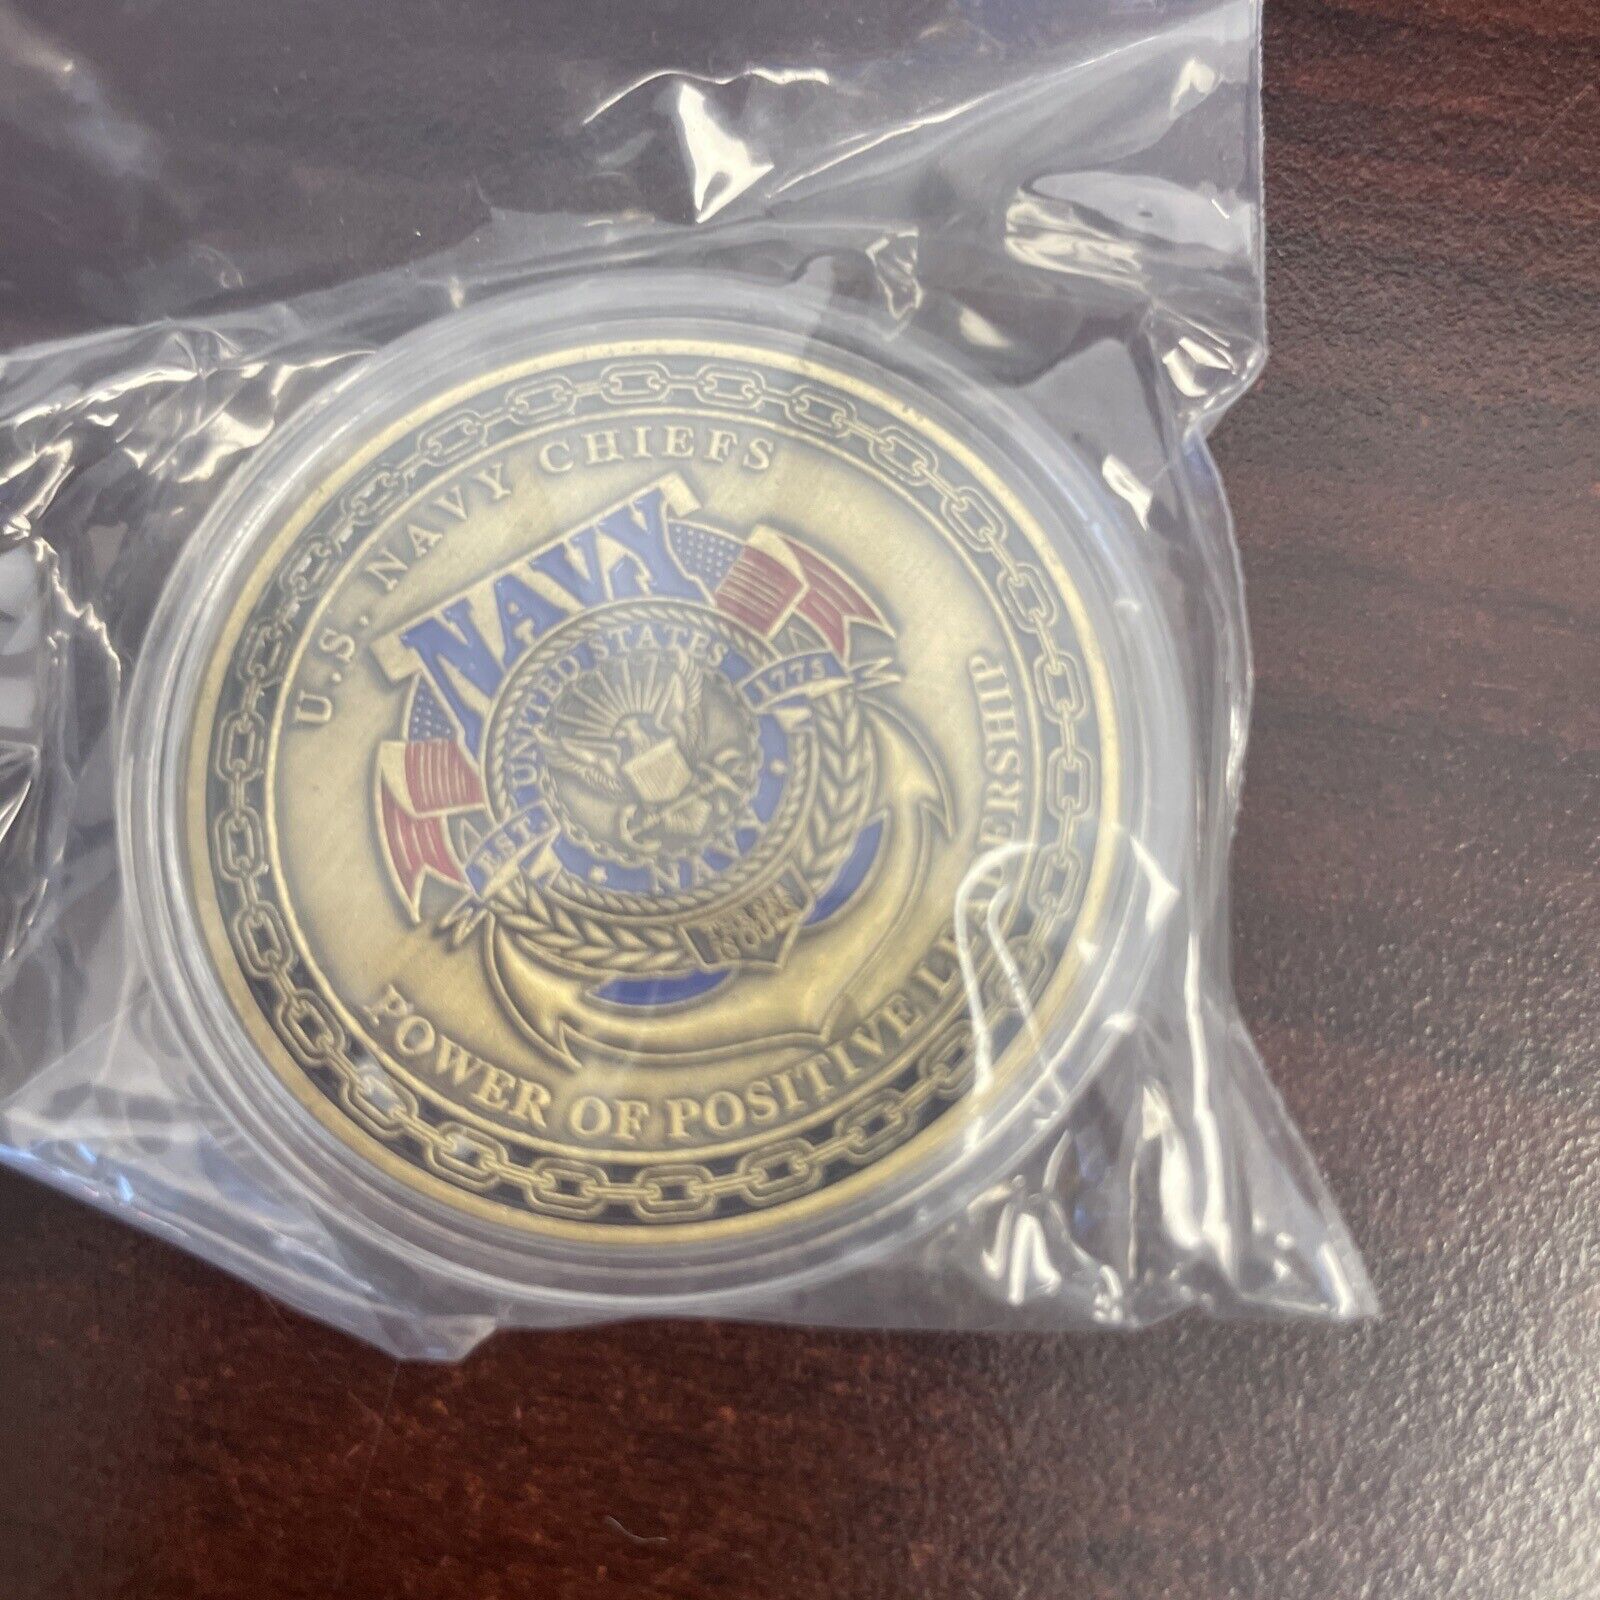 CHALLENGE COIN US NAVY CHIEFS POWER OF POSITIVE LEADERSHIP DONT TREAD ON ME 